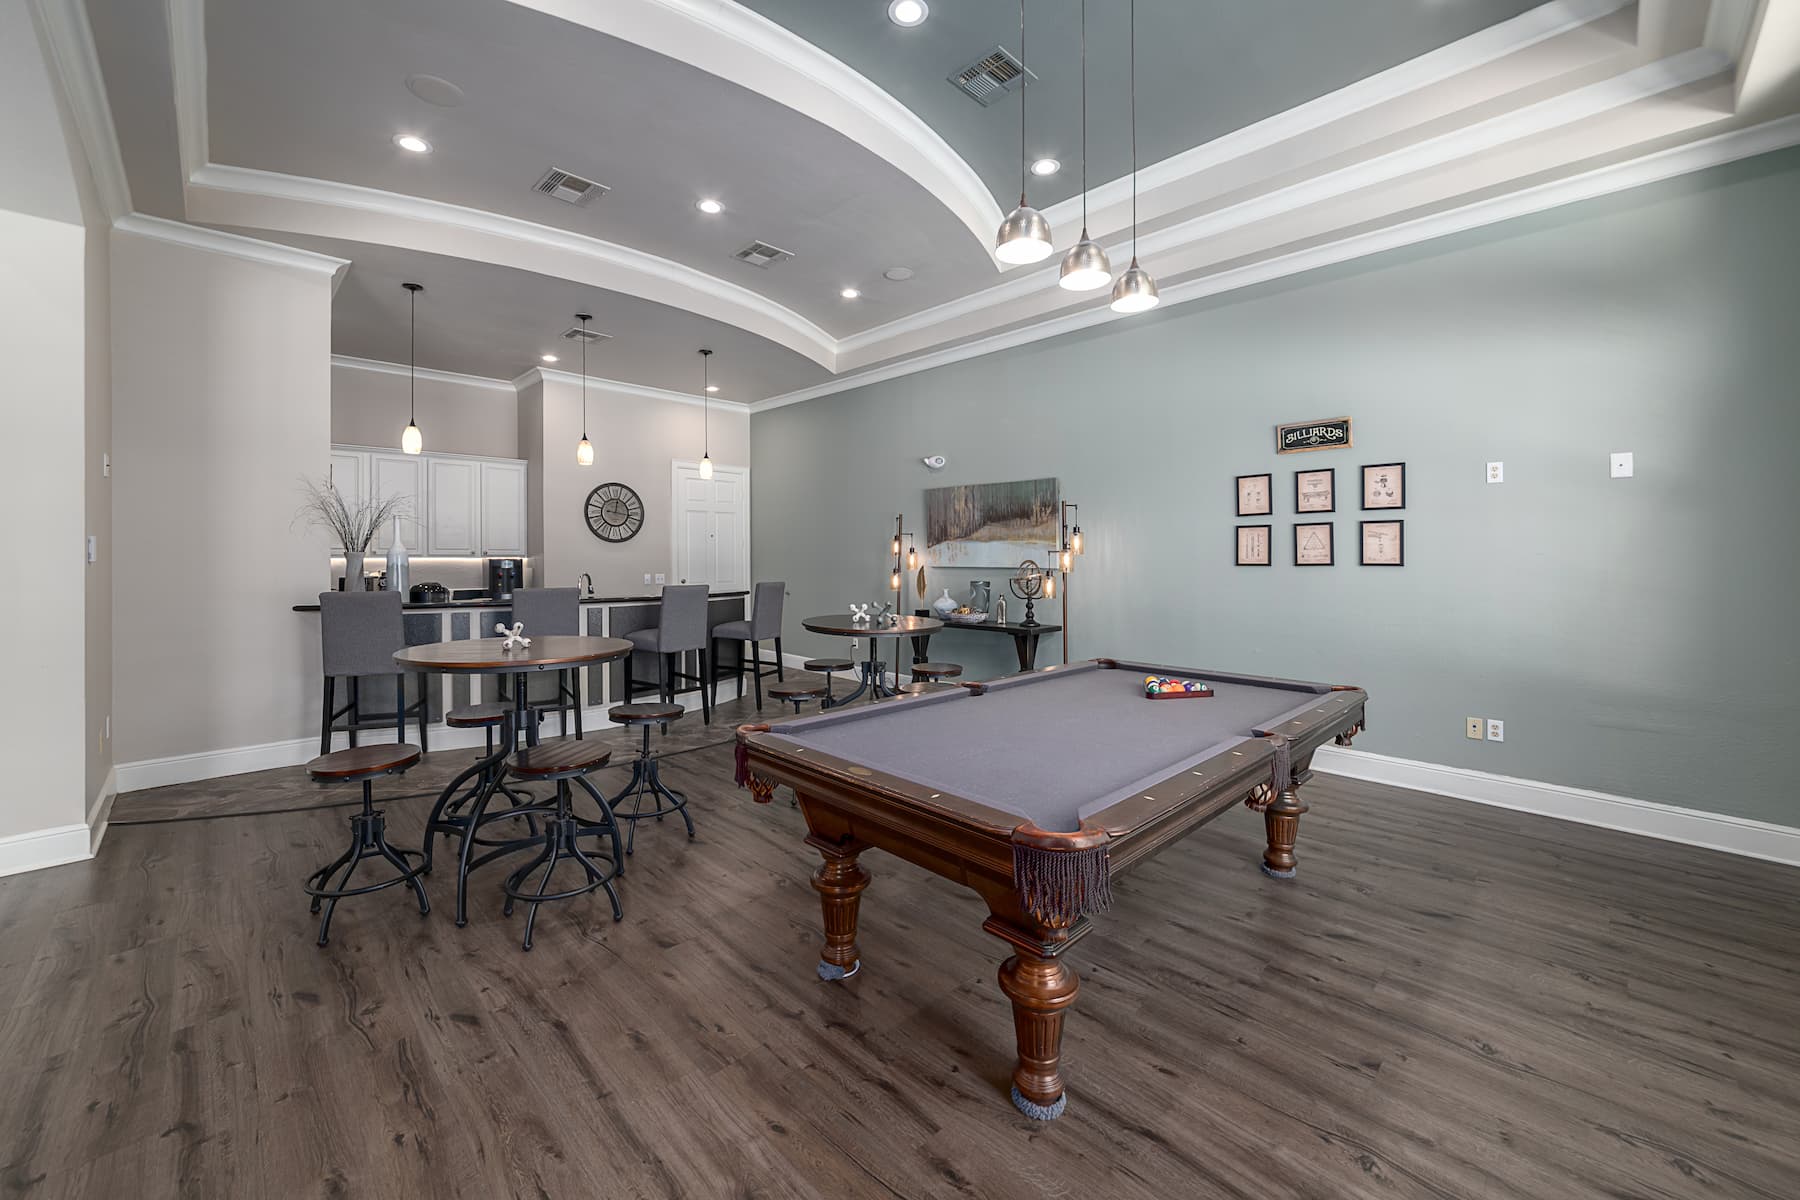 enjoy a game of pool or a conversation with friends in our game room